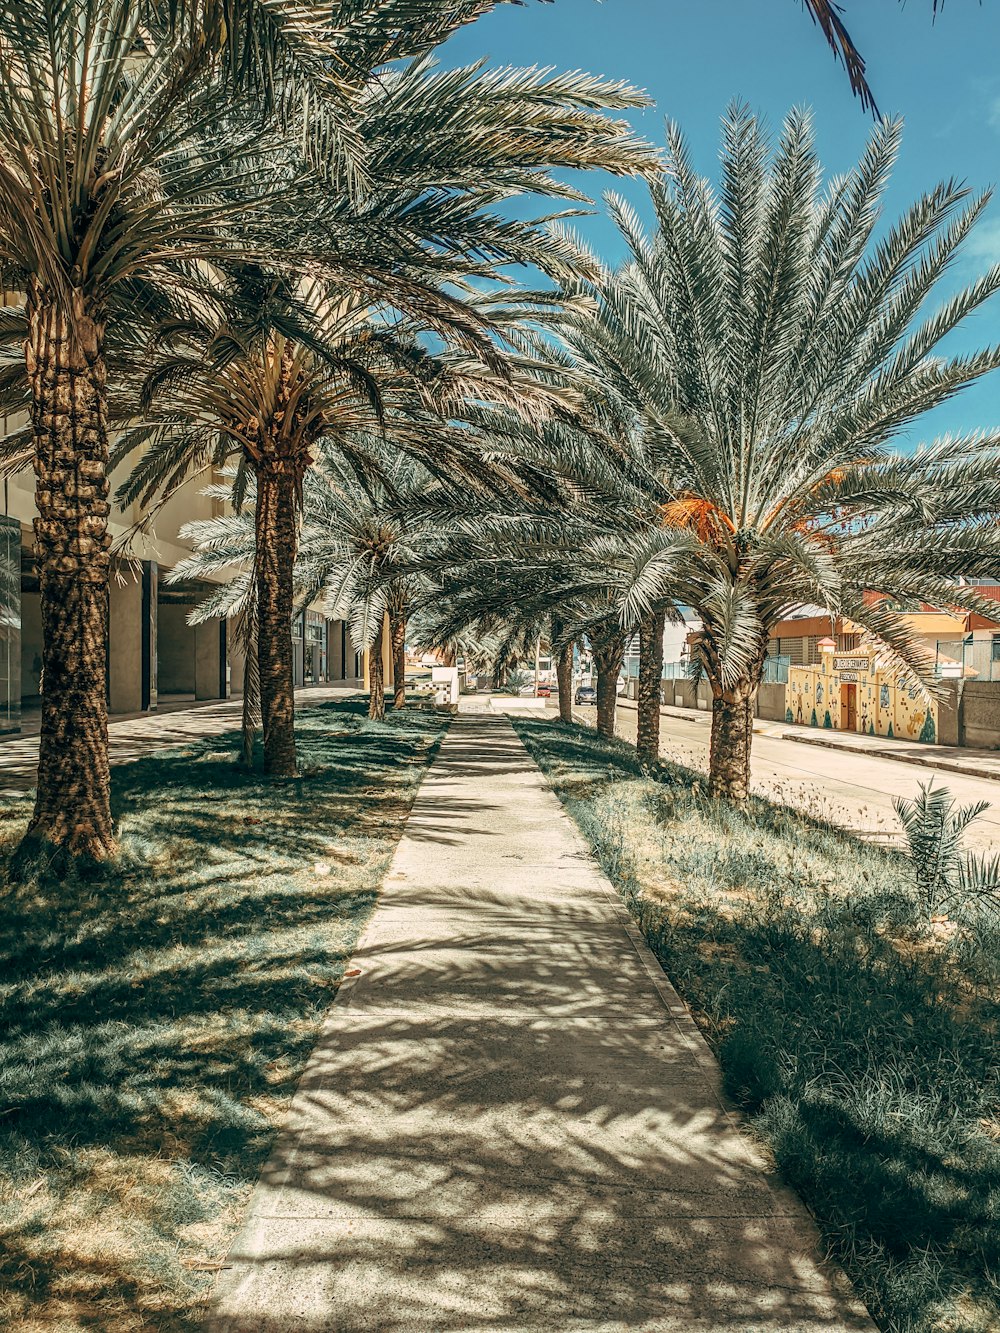 a sidewalk lined with palm trees on a sunny day